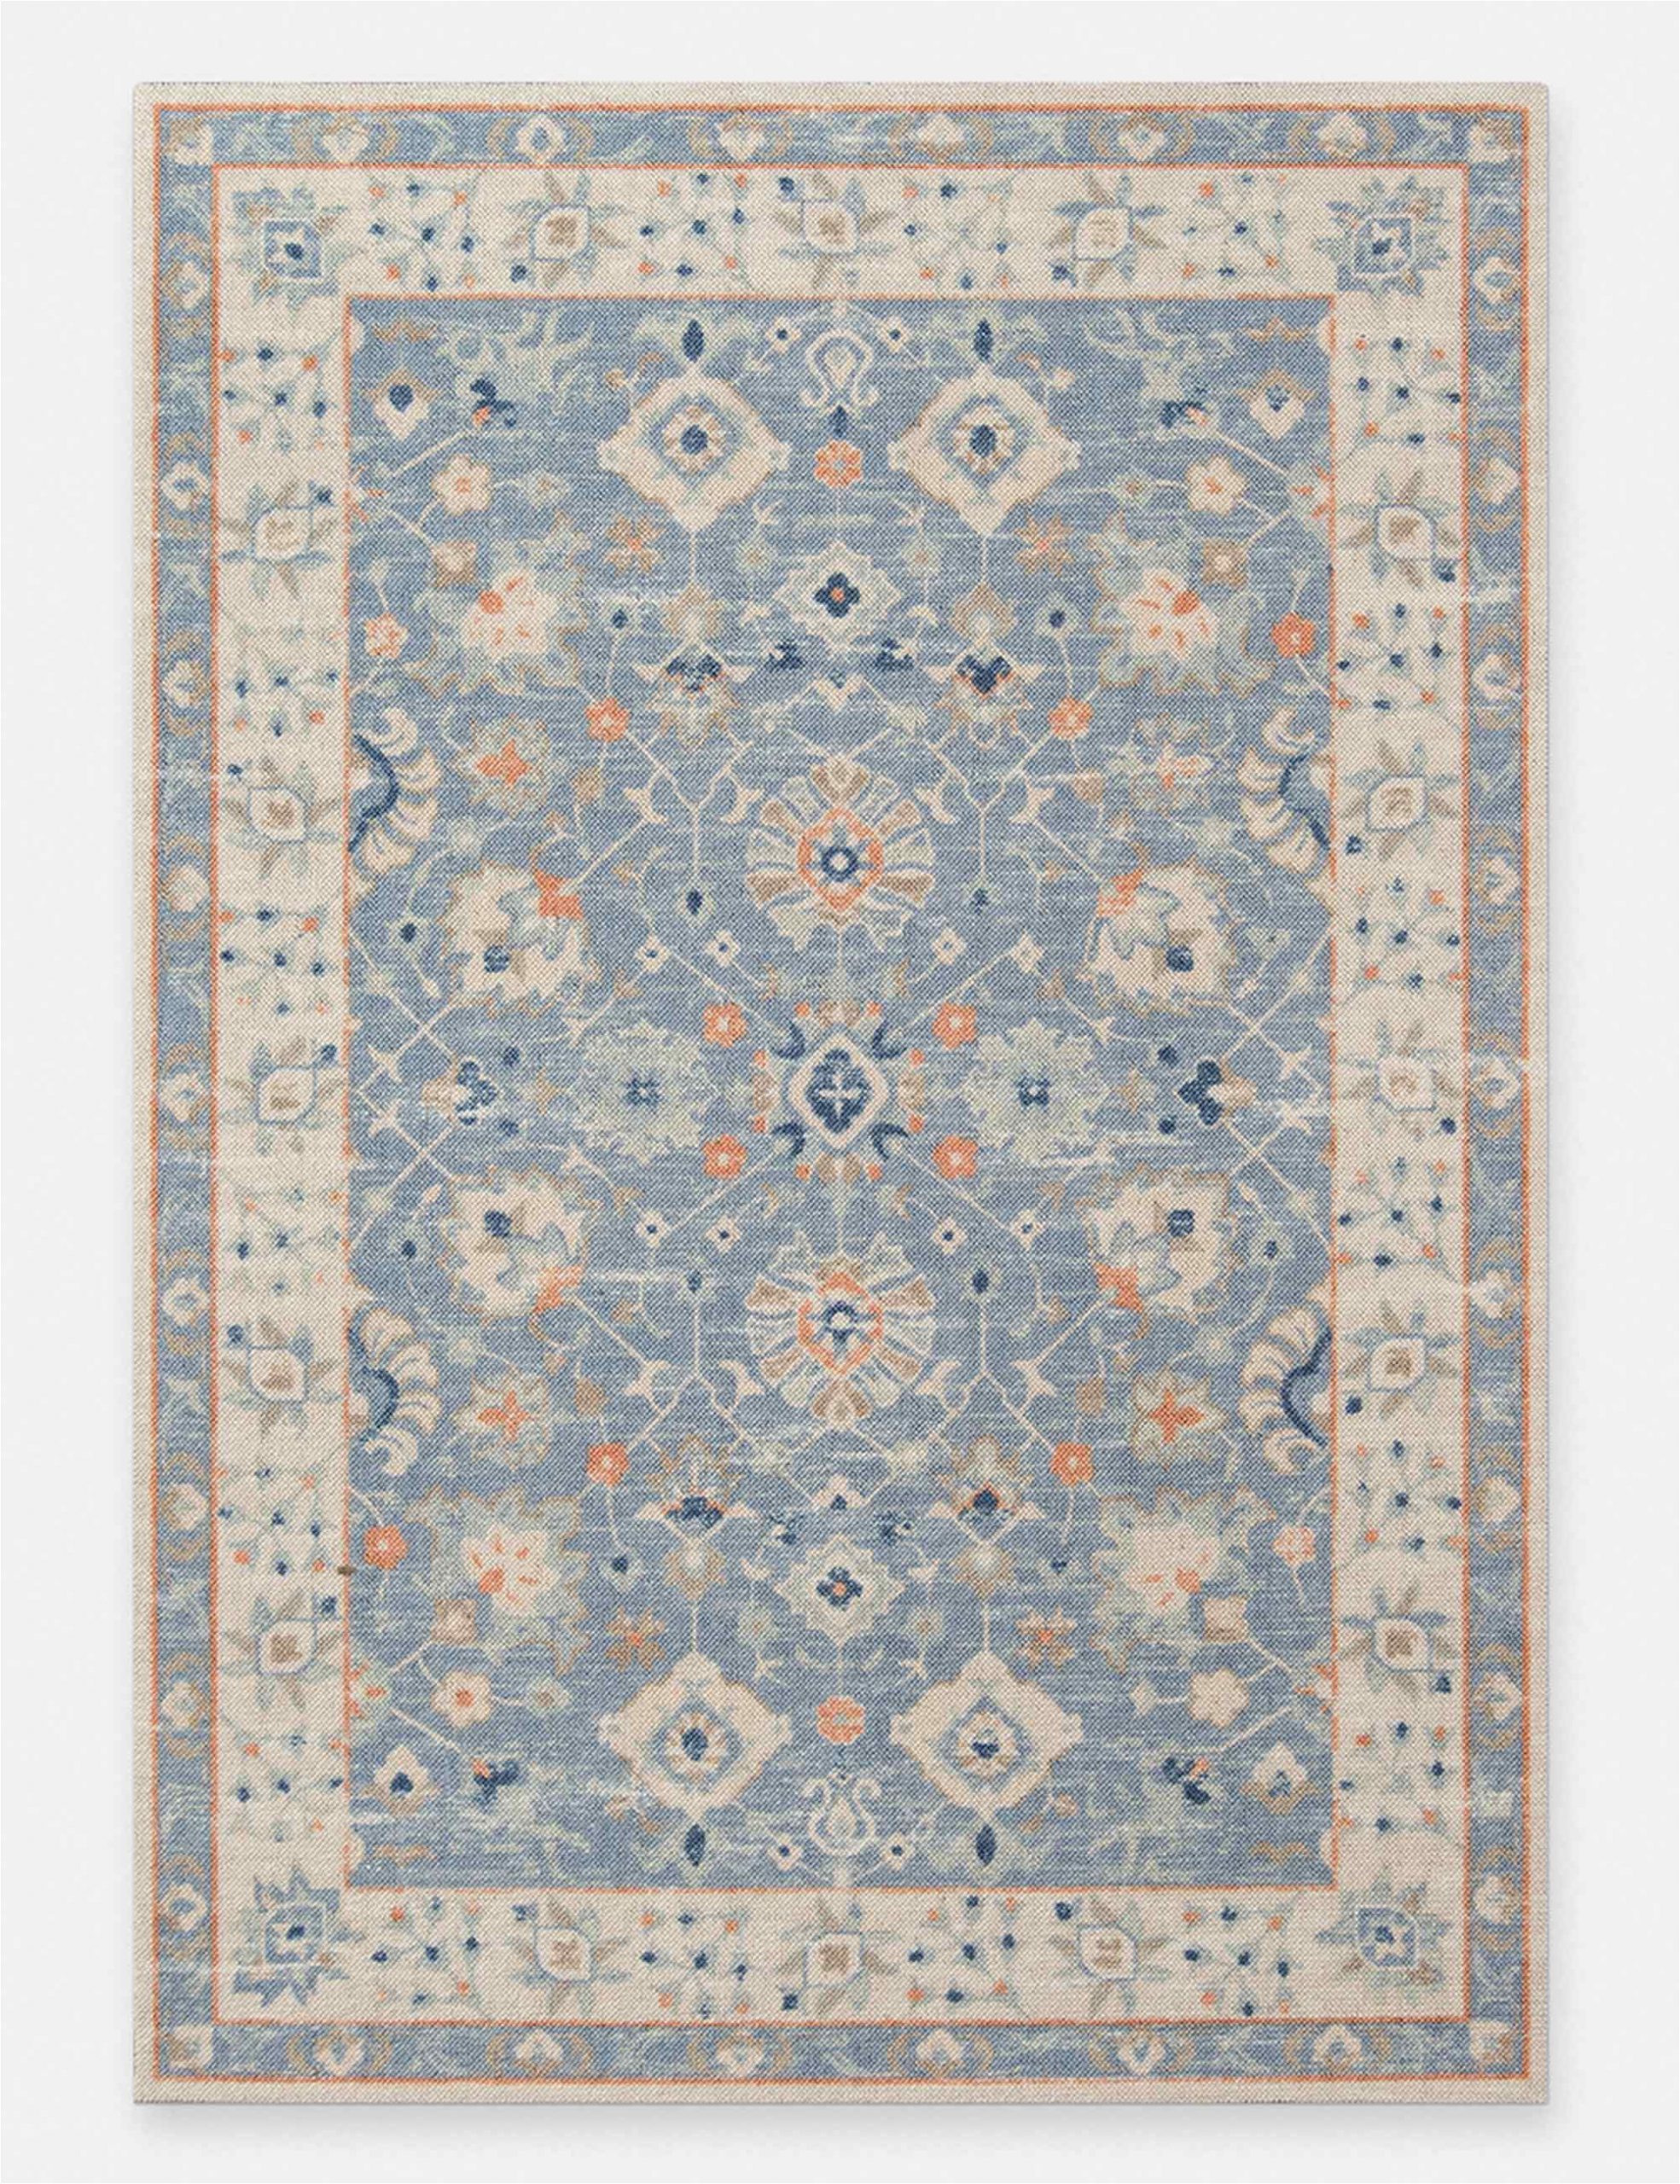 Peach and Blue Persian Style Chenille Oasis area Rug A Palette Of soft Subtle Hues Gives This Patterned Rug A